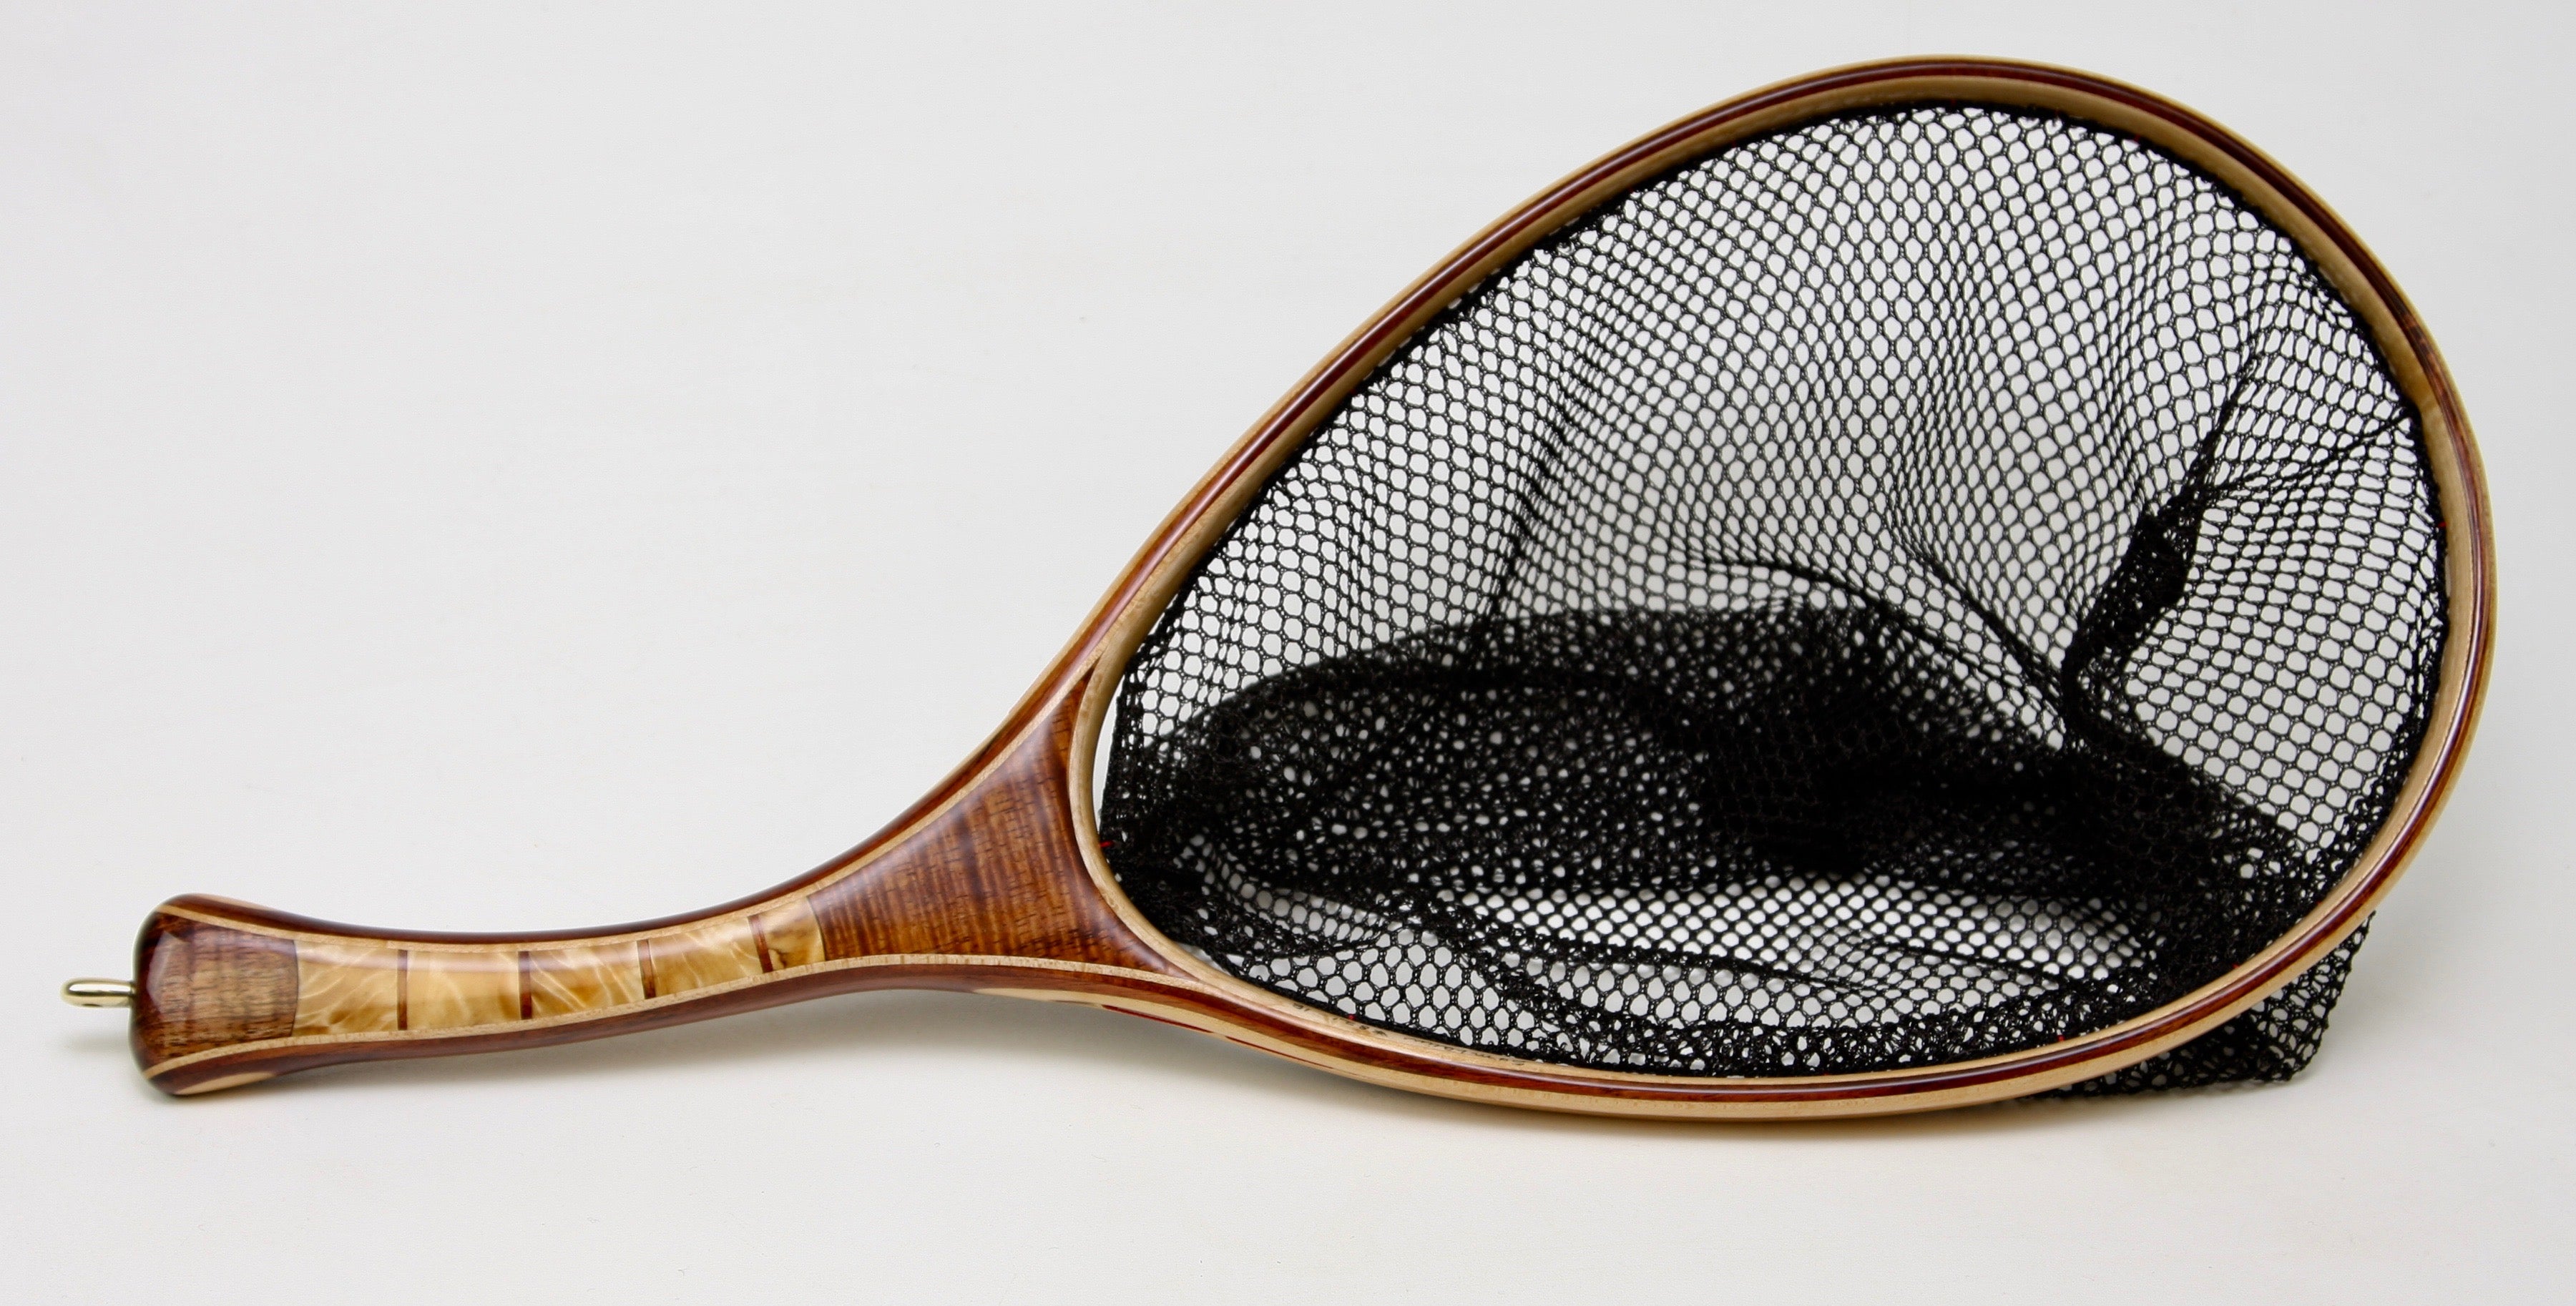 Medium sized Fly Fishing Net: Quilted Maple and Koa - Nets that